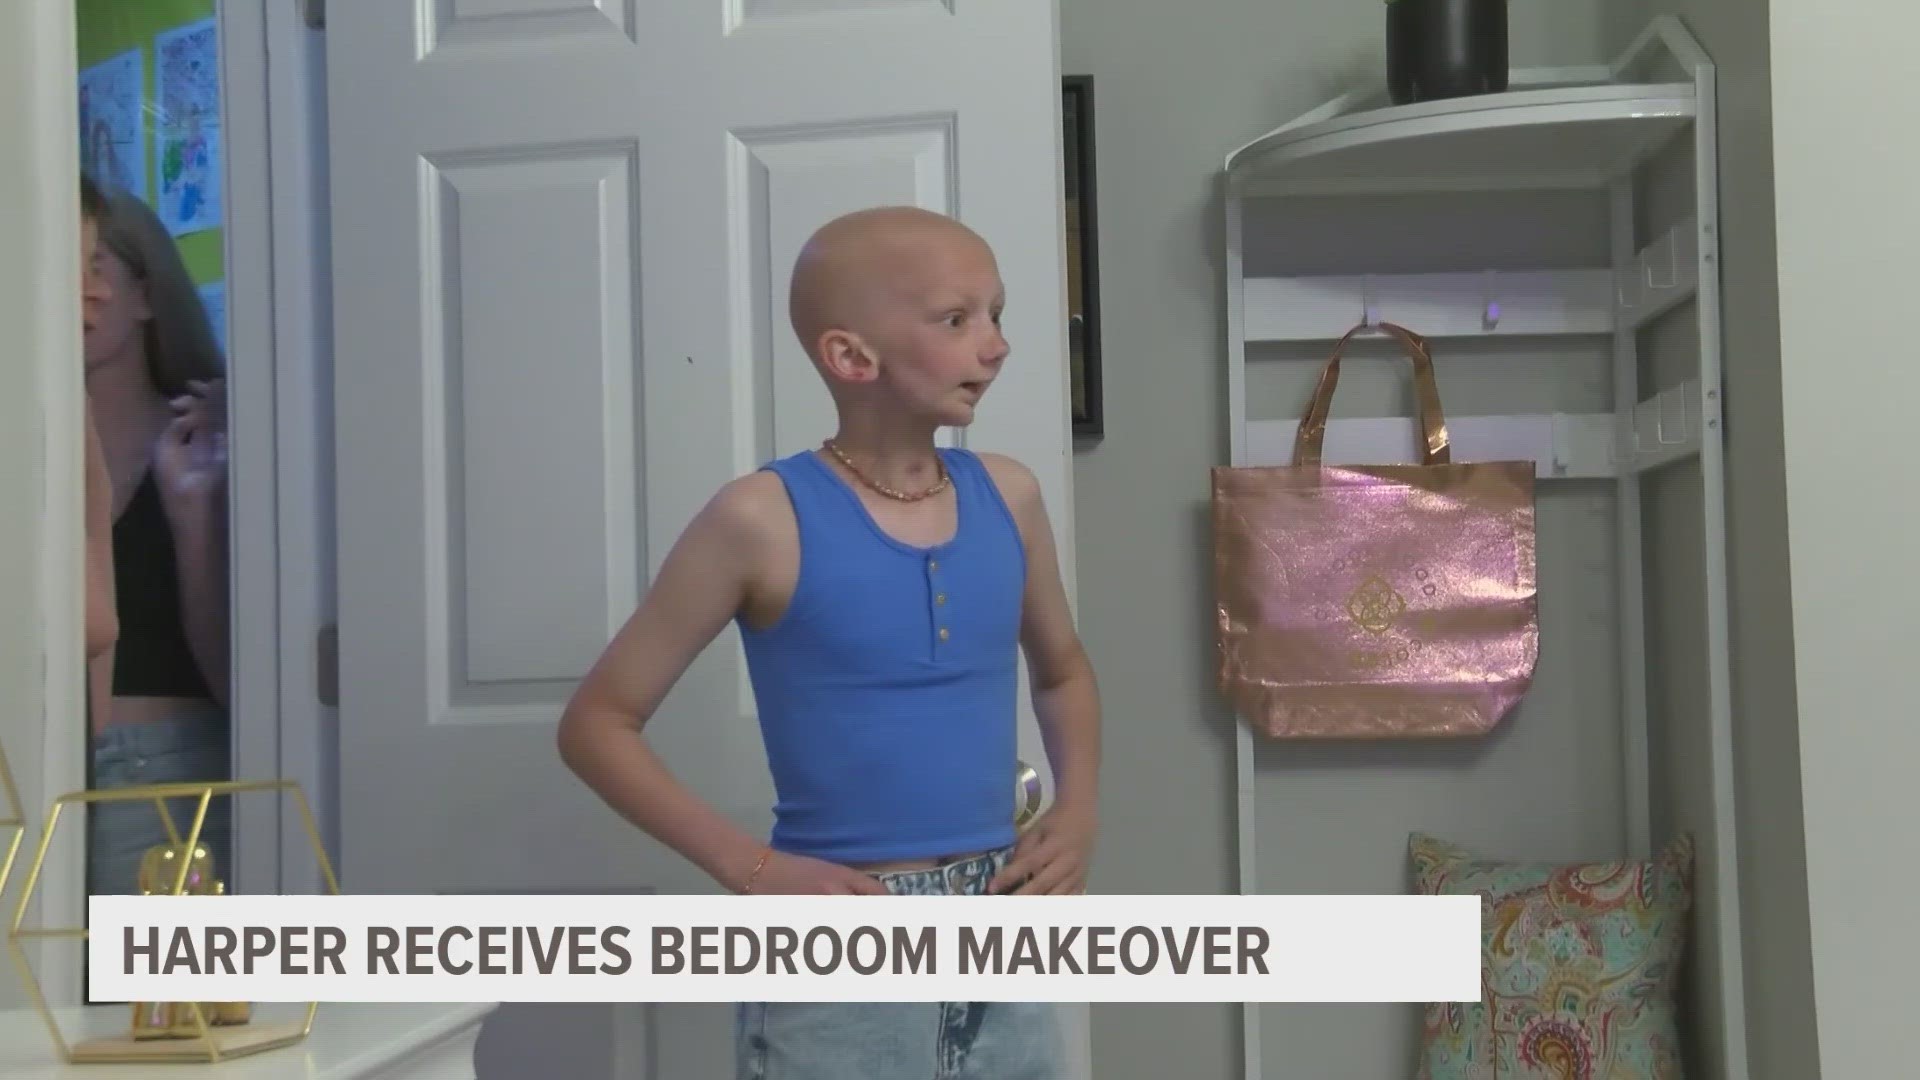 11-year-old Harper Stribe was diagnosed with rhabdomyosarcoma in 2017.